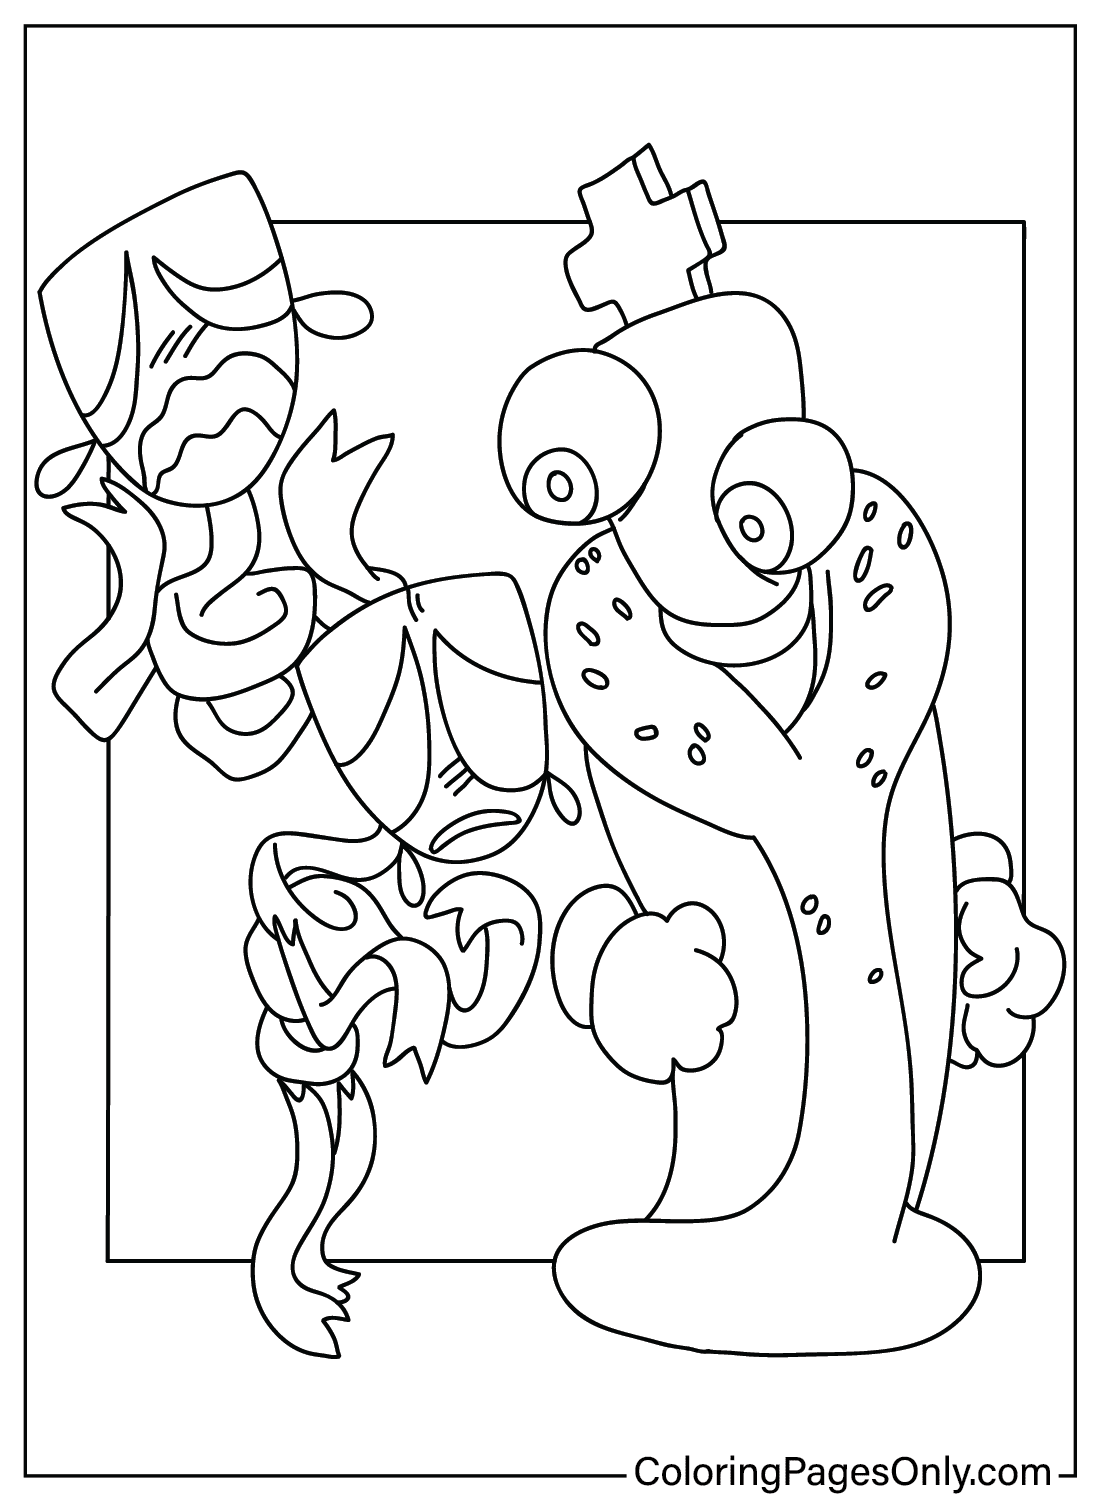 Kinger and Gangle Coloring Page from Gangle